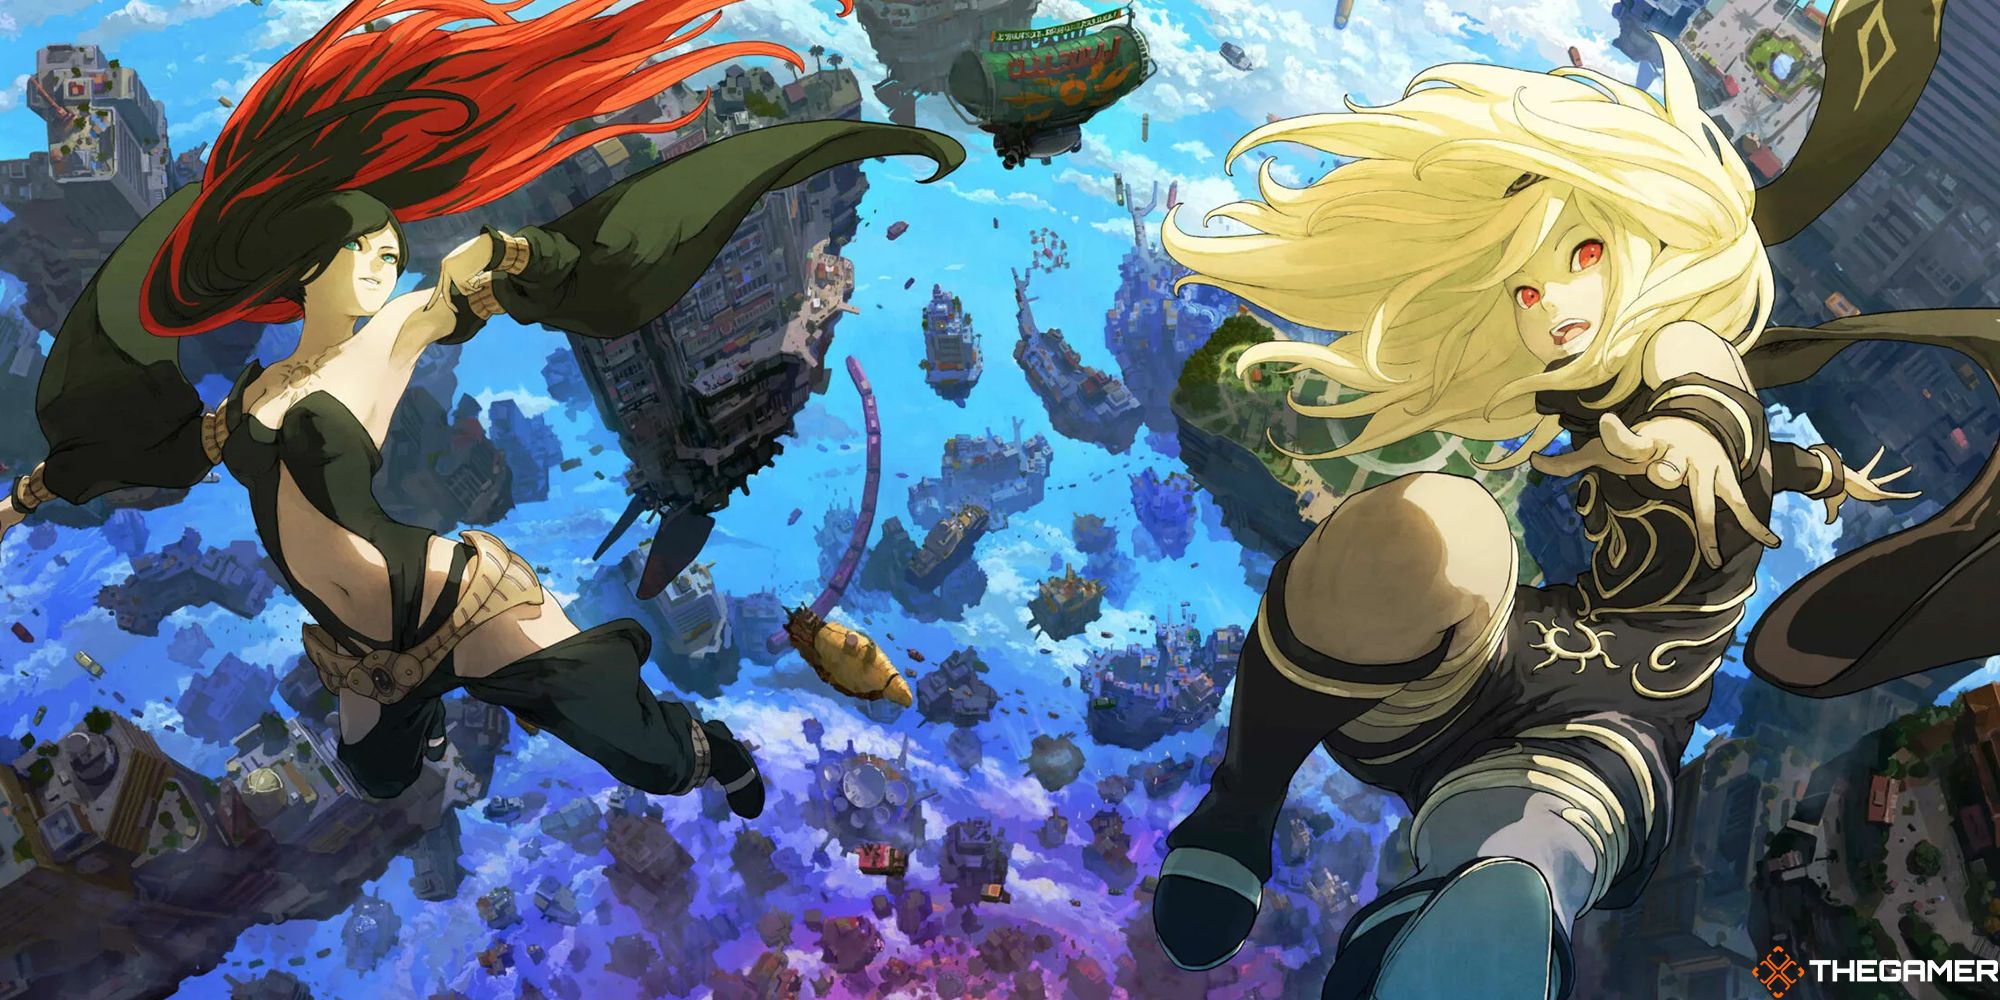 Kat and Raven falling through the sky in Gravity Rush 2